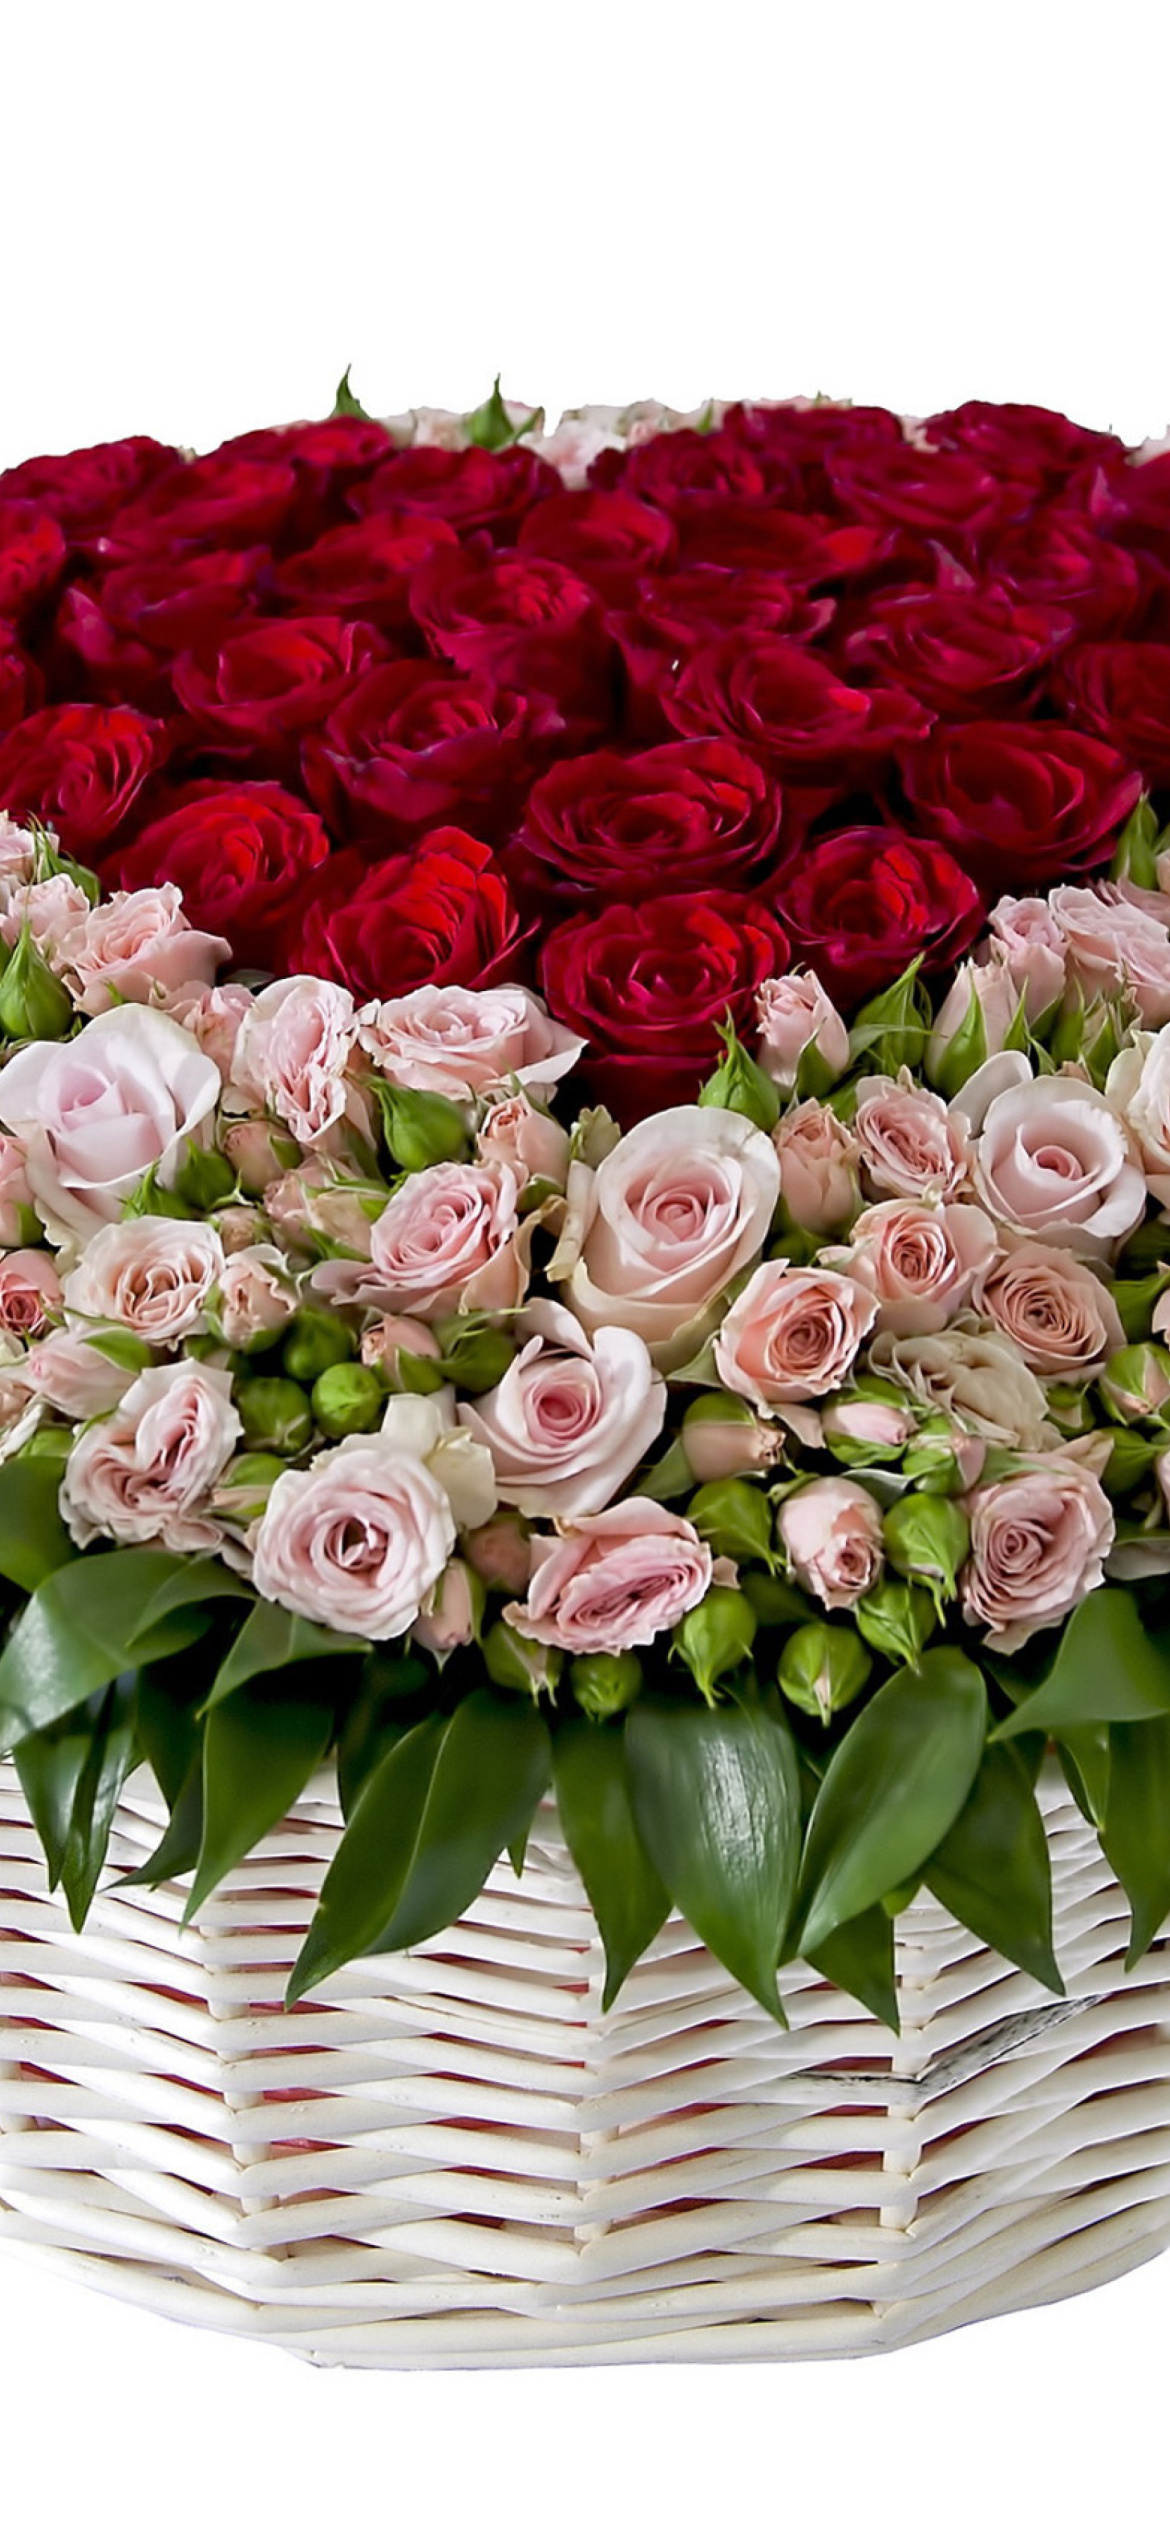 Basket of Roses from Florist wallpaper 1170x2532